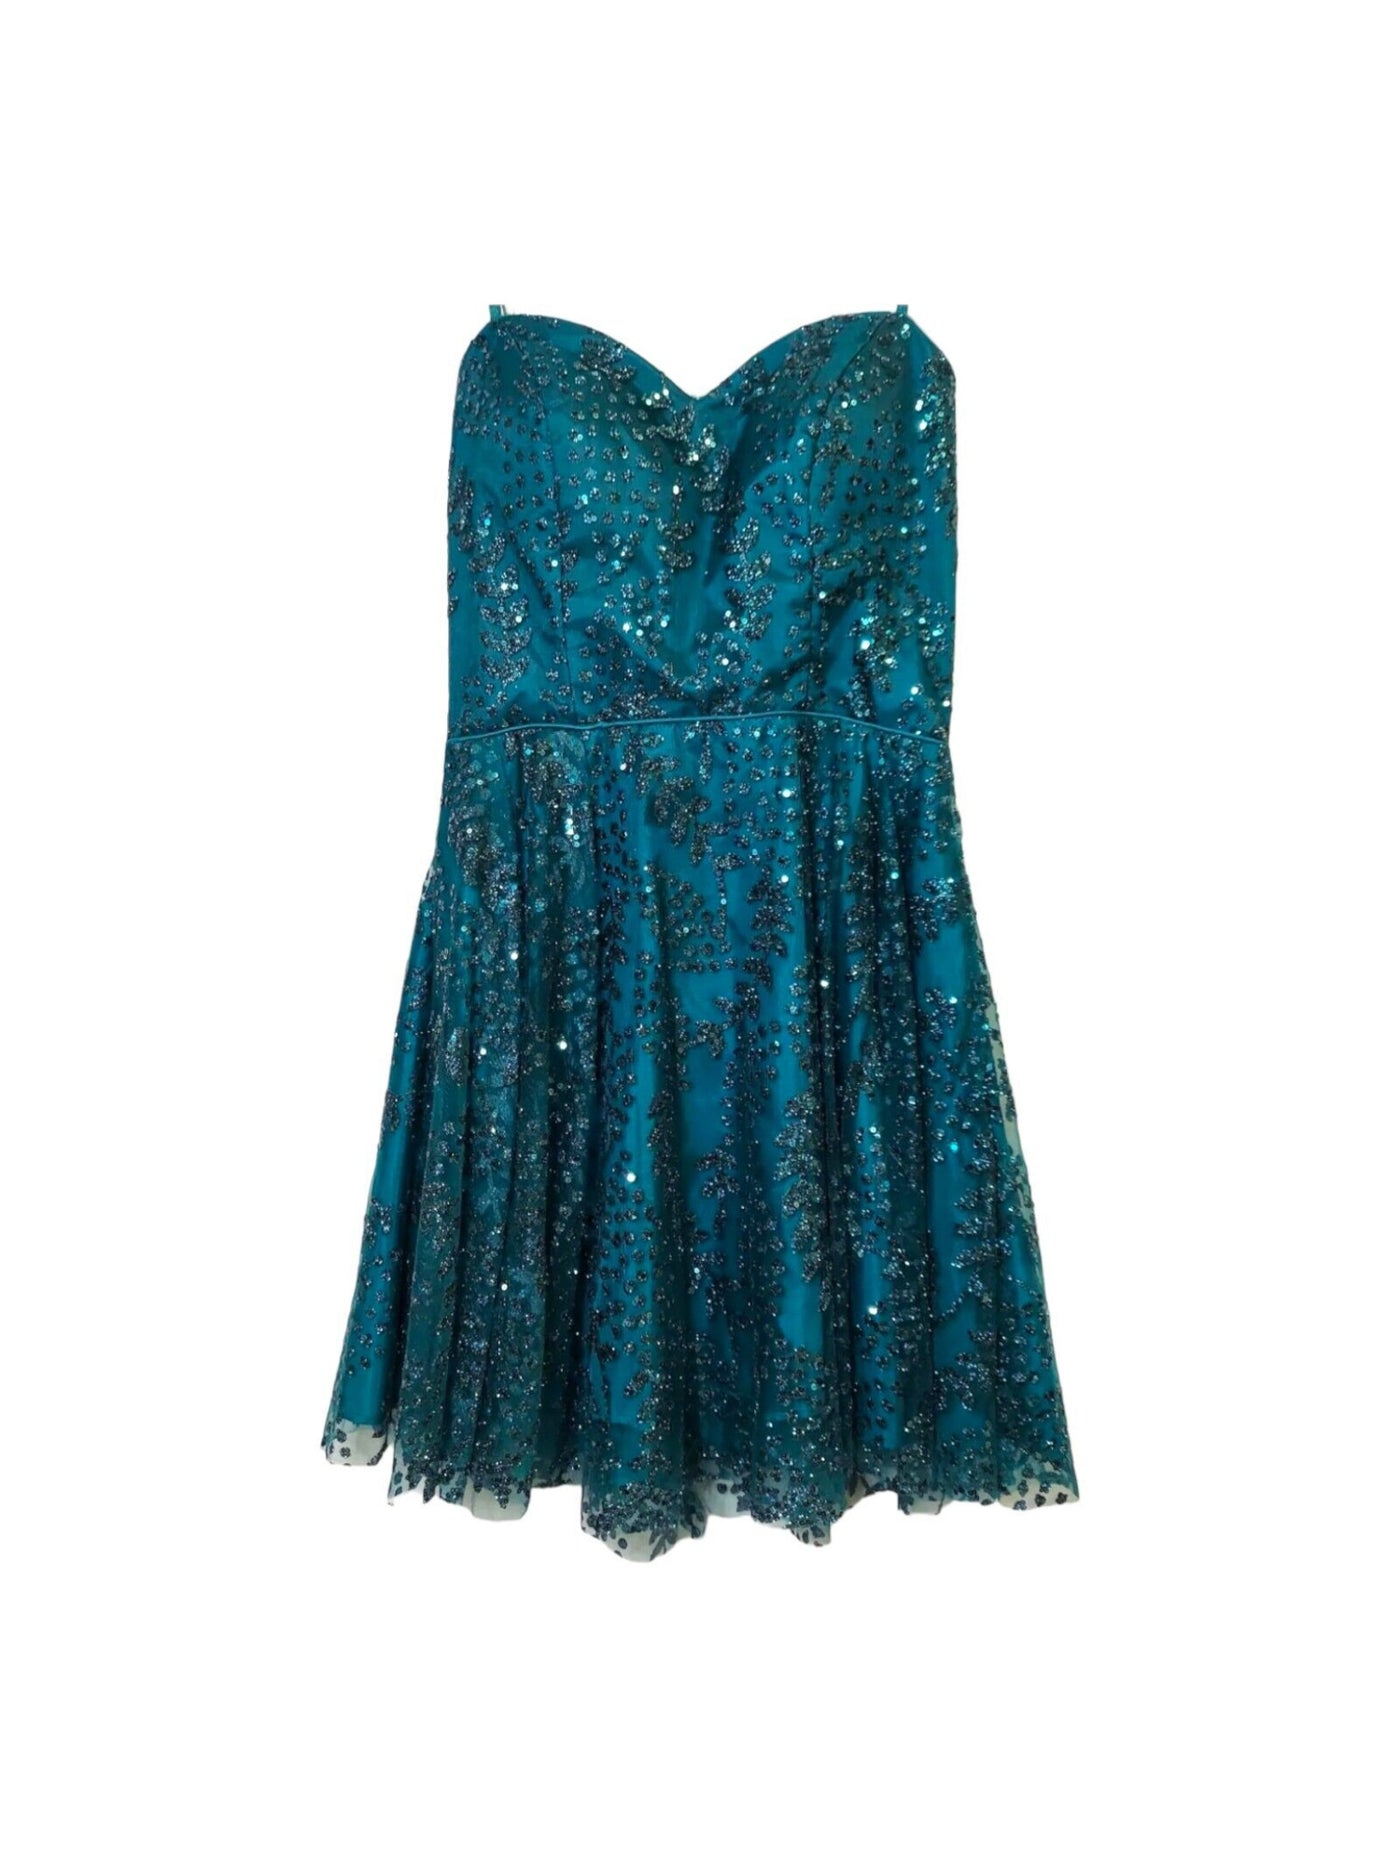 BLONDIE NITES Womens Teal Sequined Glitter Lined Adjustable Zippered Sleeveless Round Neck Short Party Fit + Flare Dress Juniors 5